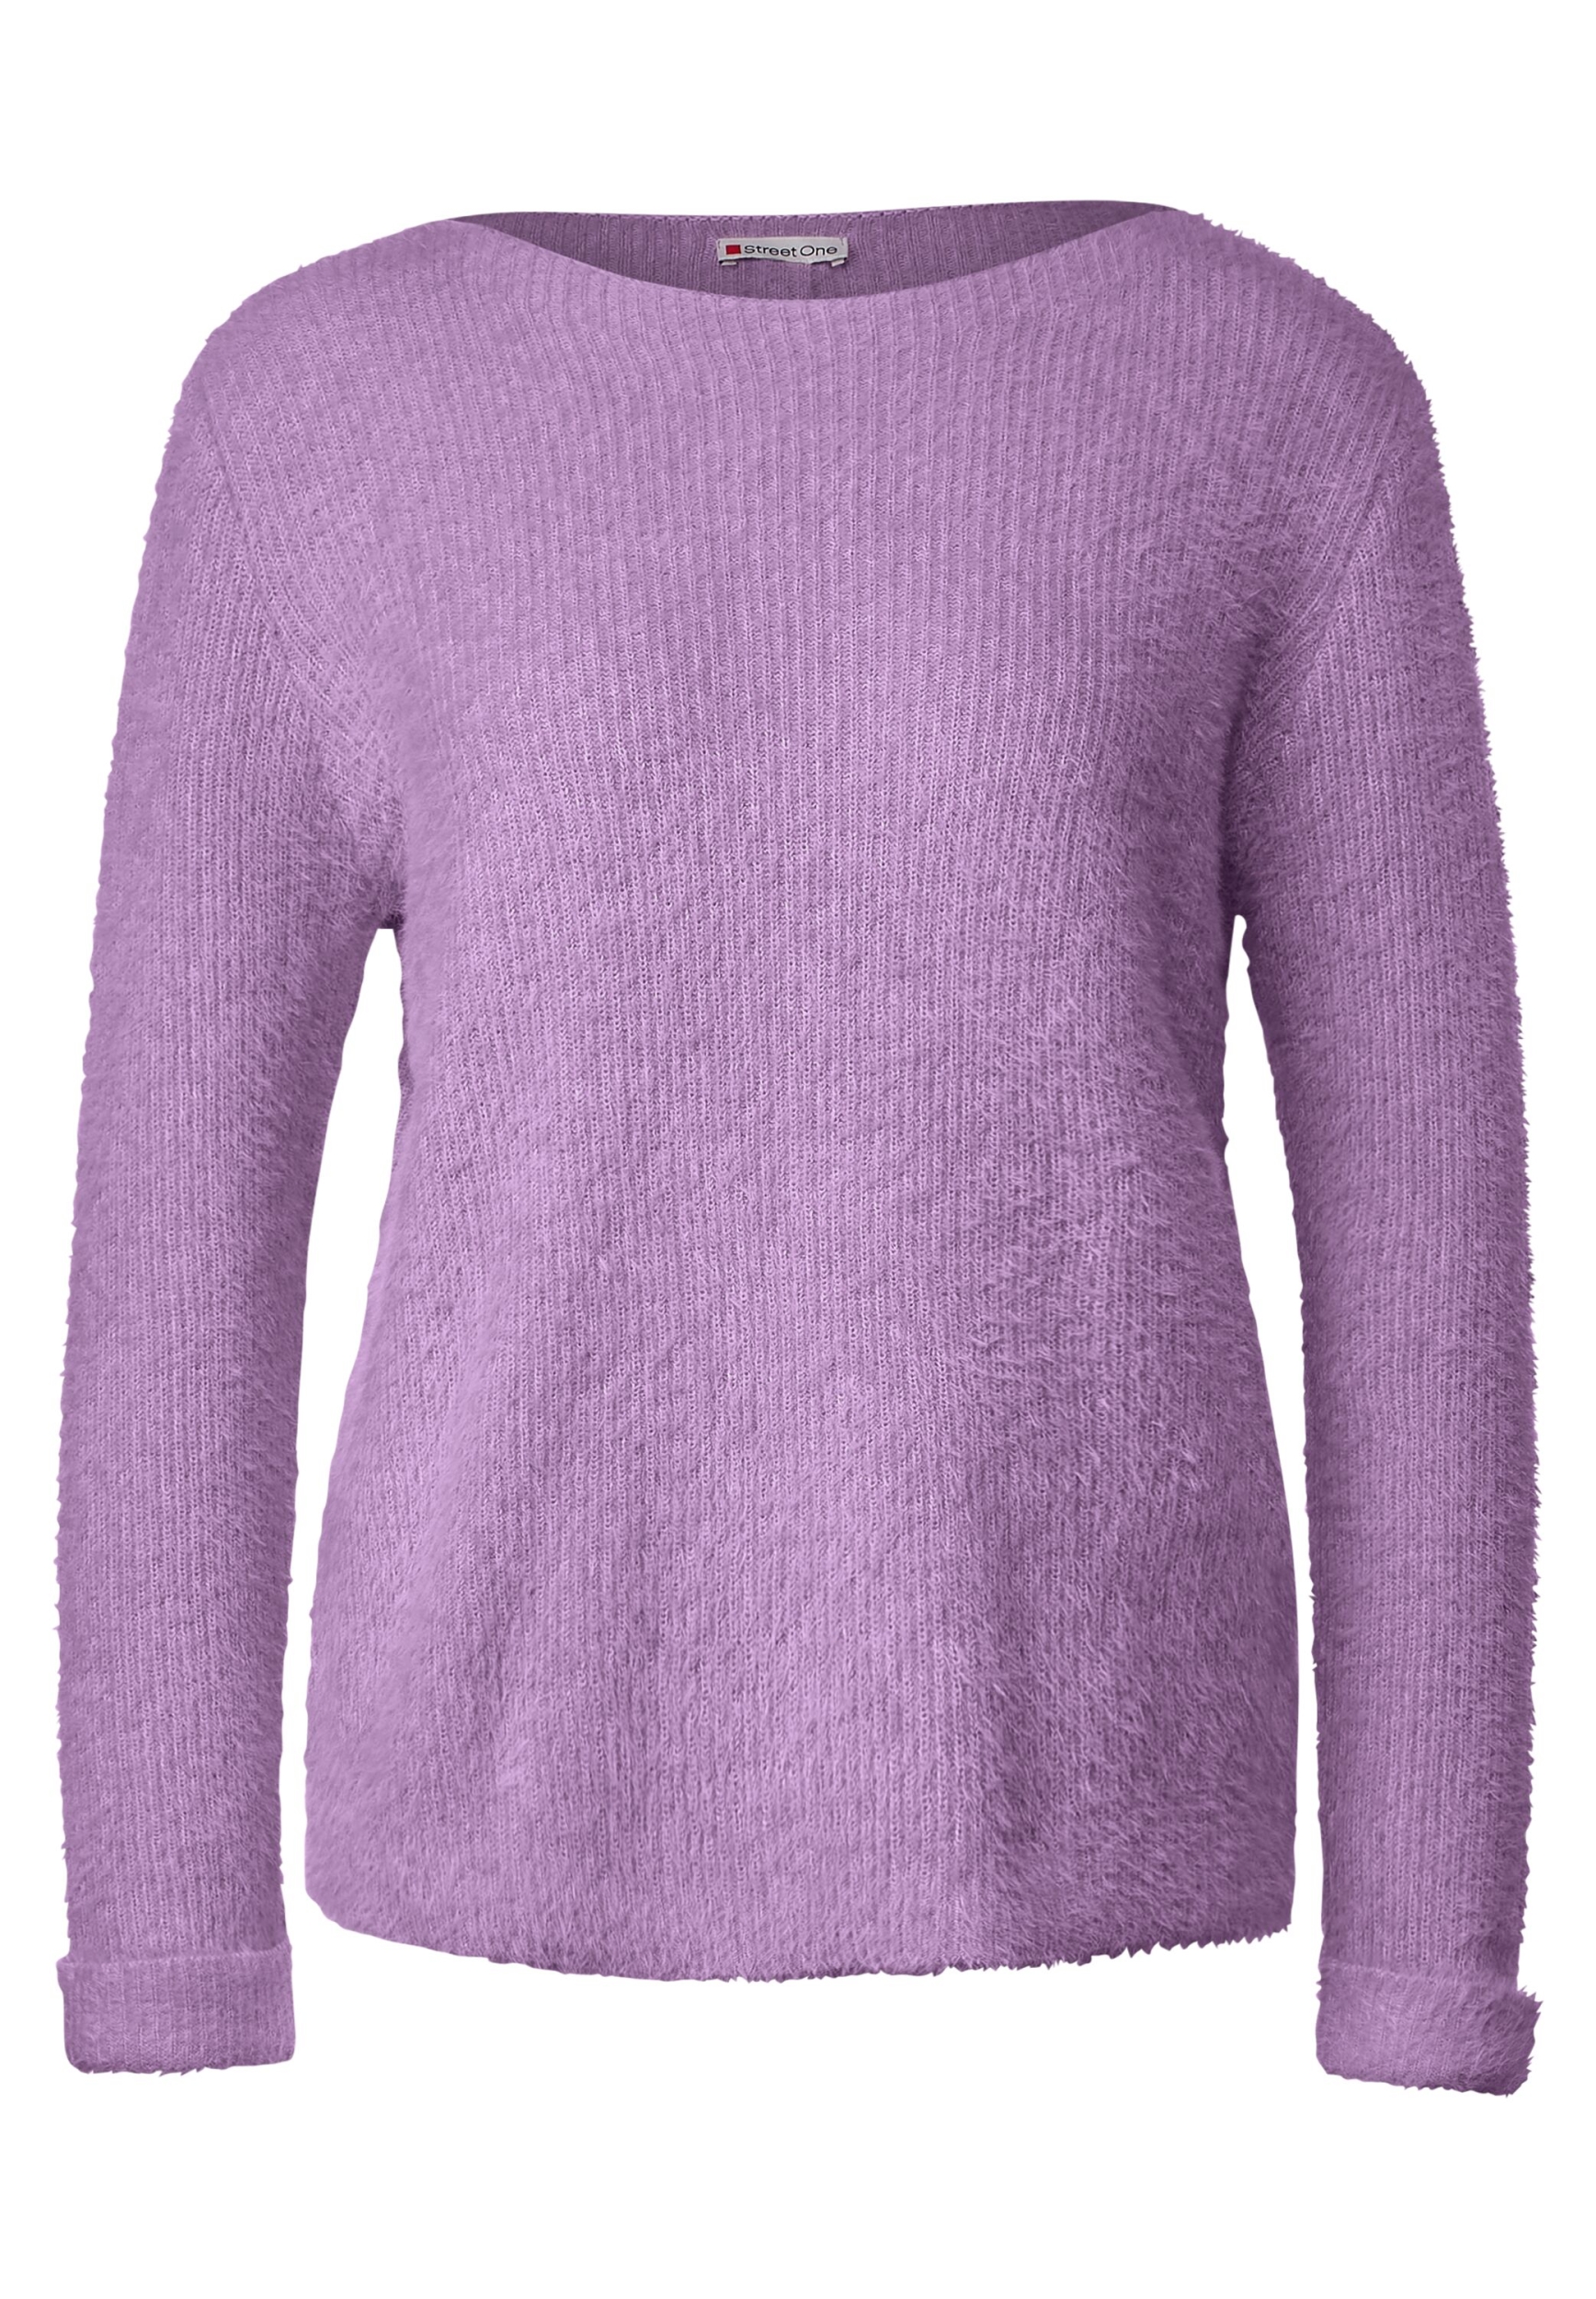 lilac | pure | yarn feather 46 A302413-15289-46 | BF_sweater soft